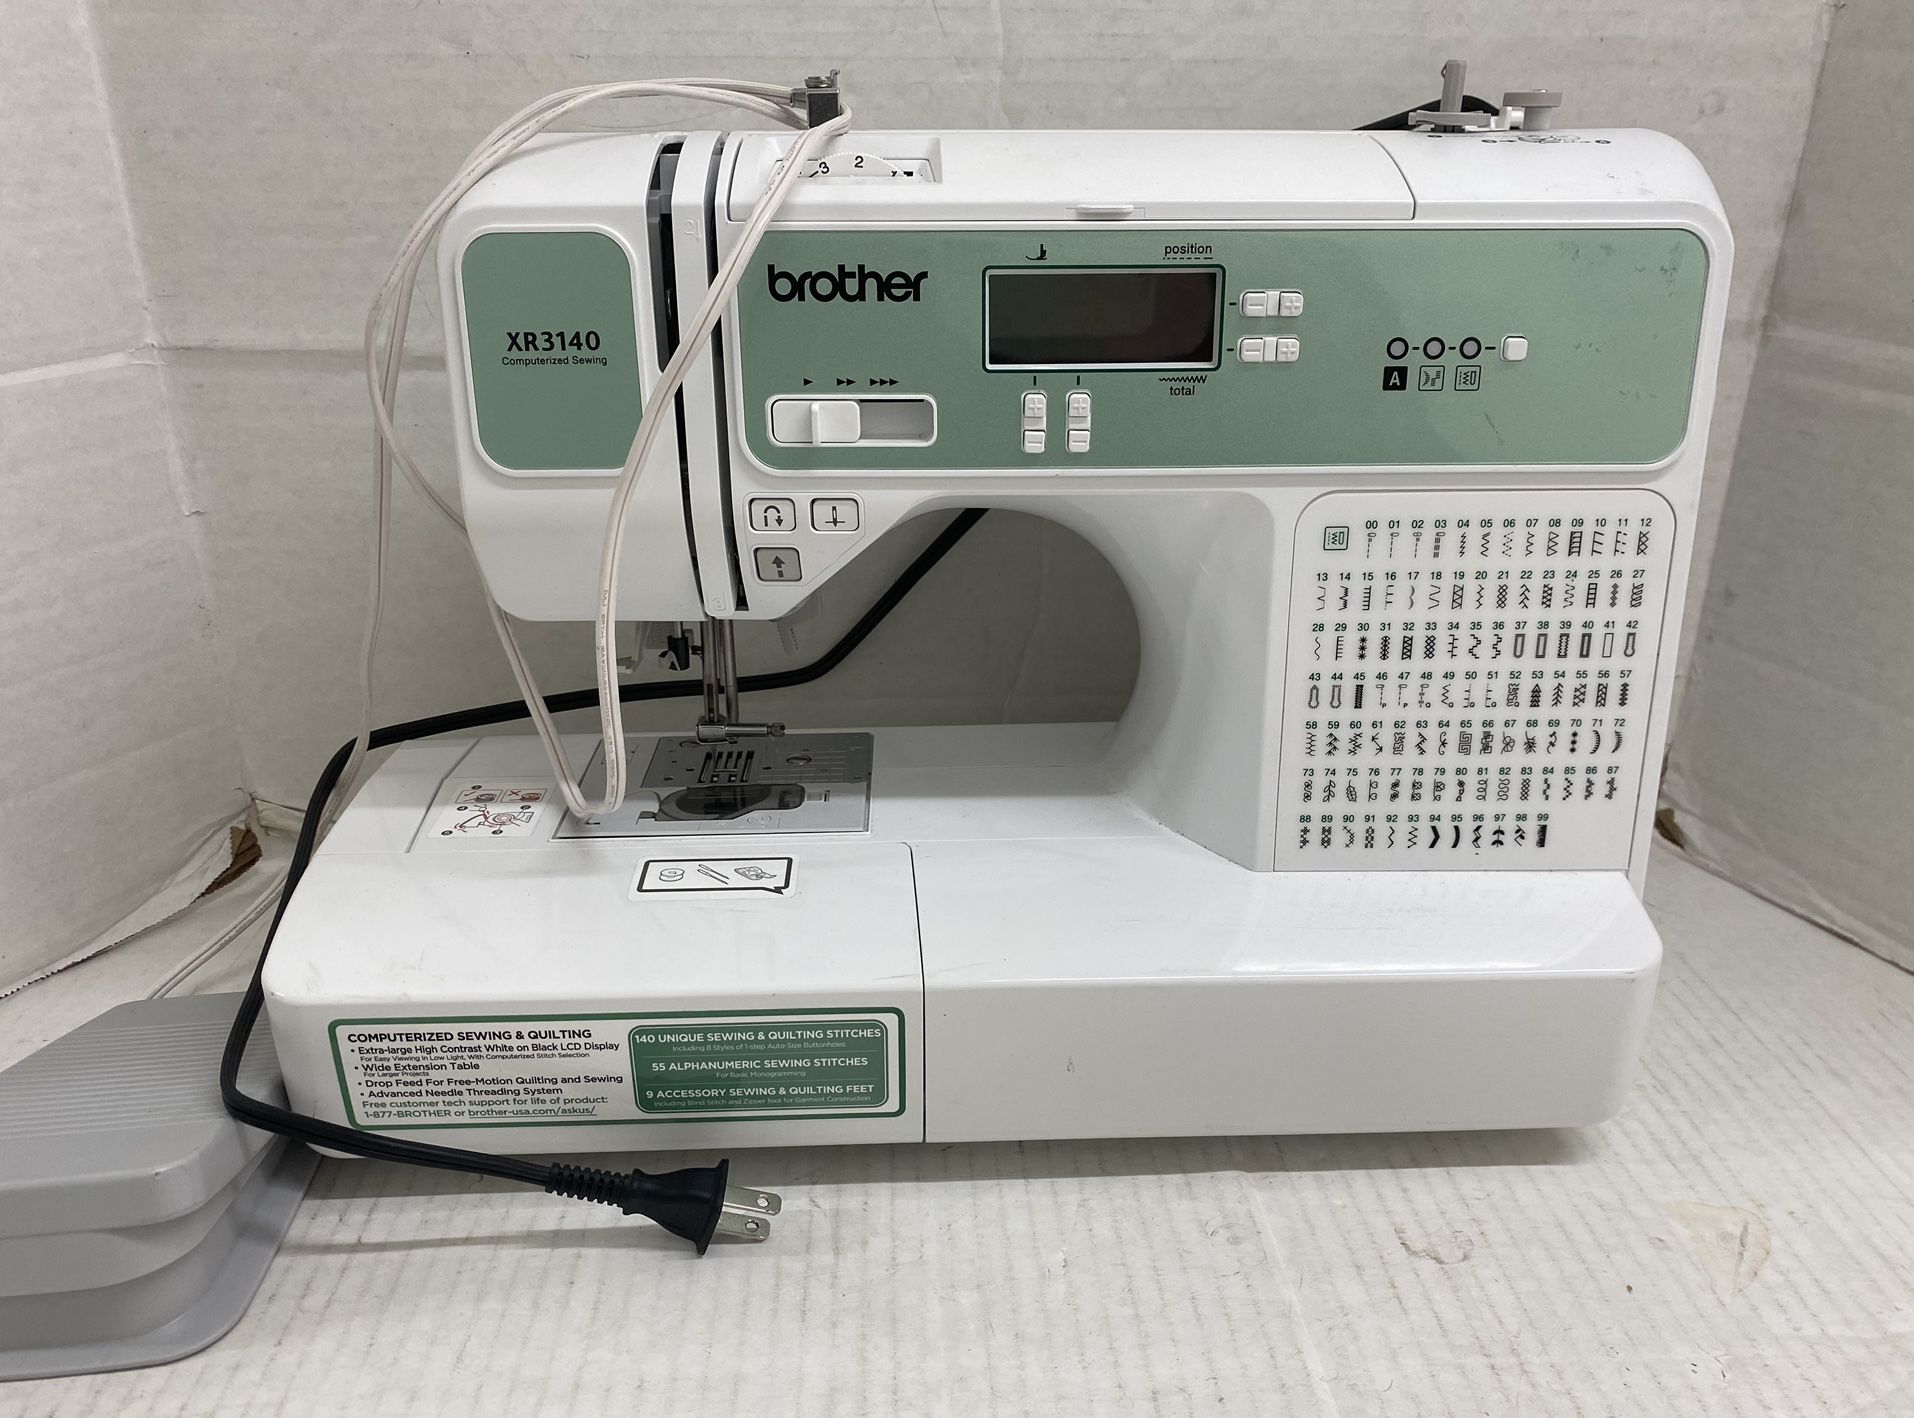 Brother Xm2701 Sewing Machine for Sale in Baton Rouge, LA - OfferUp